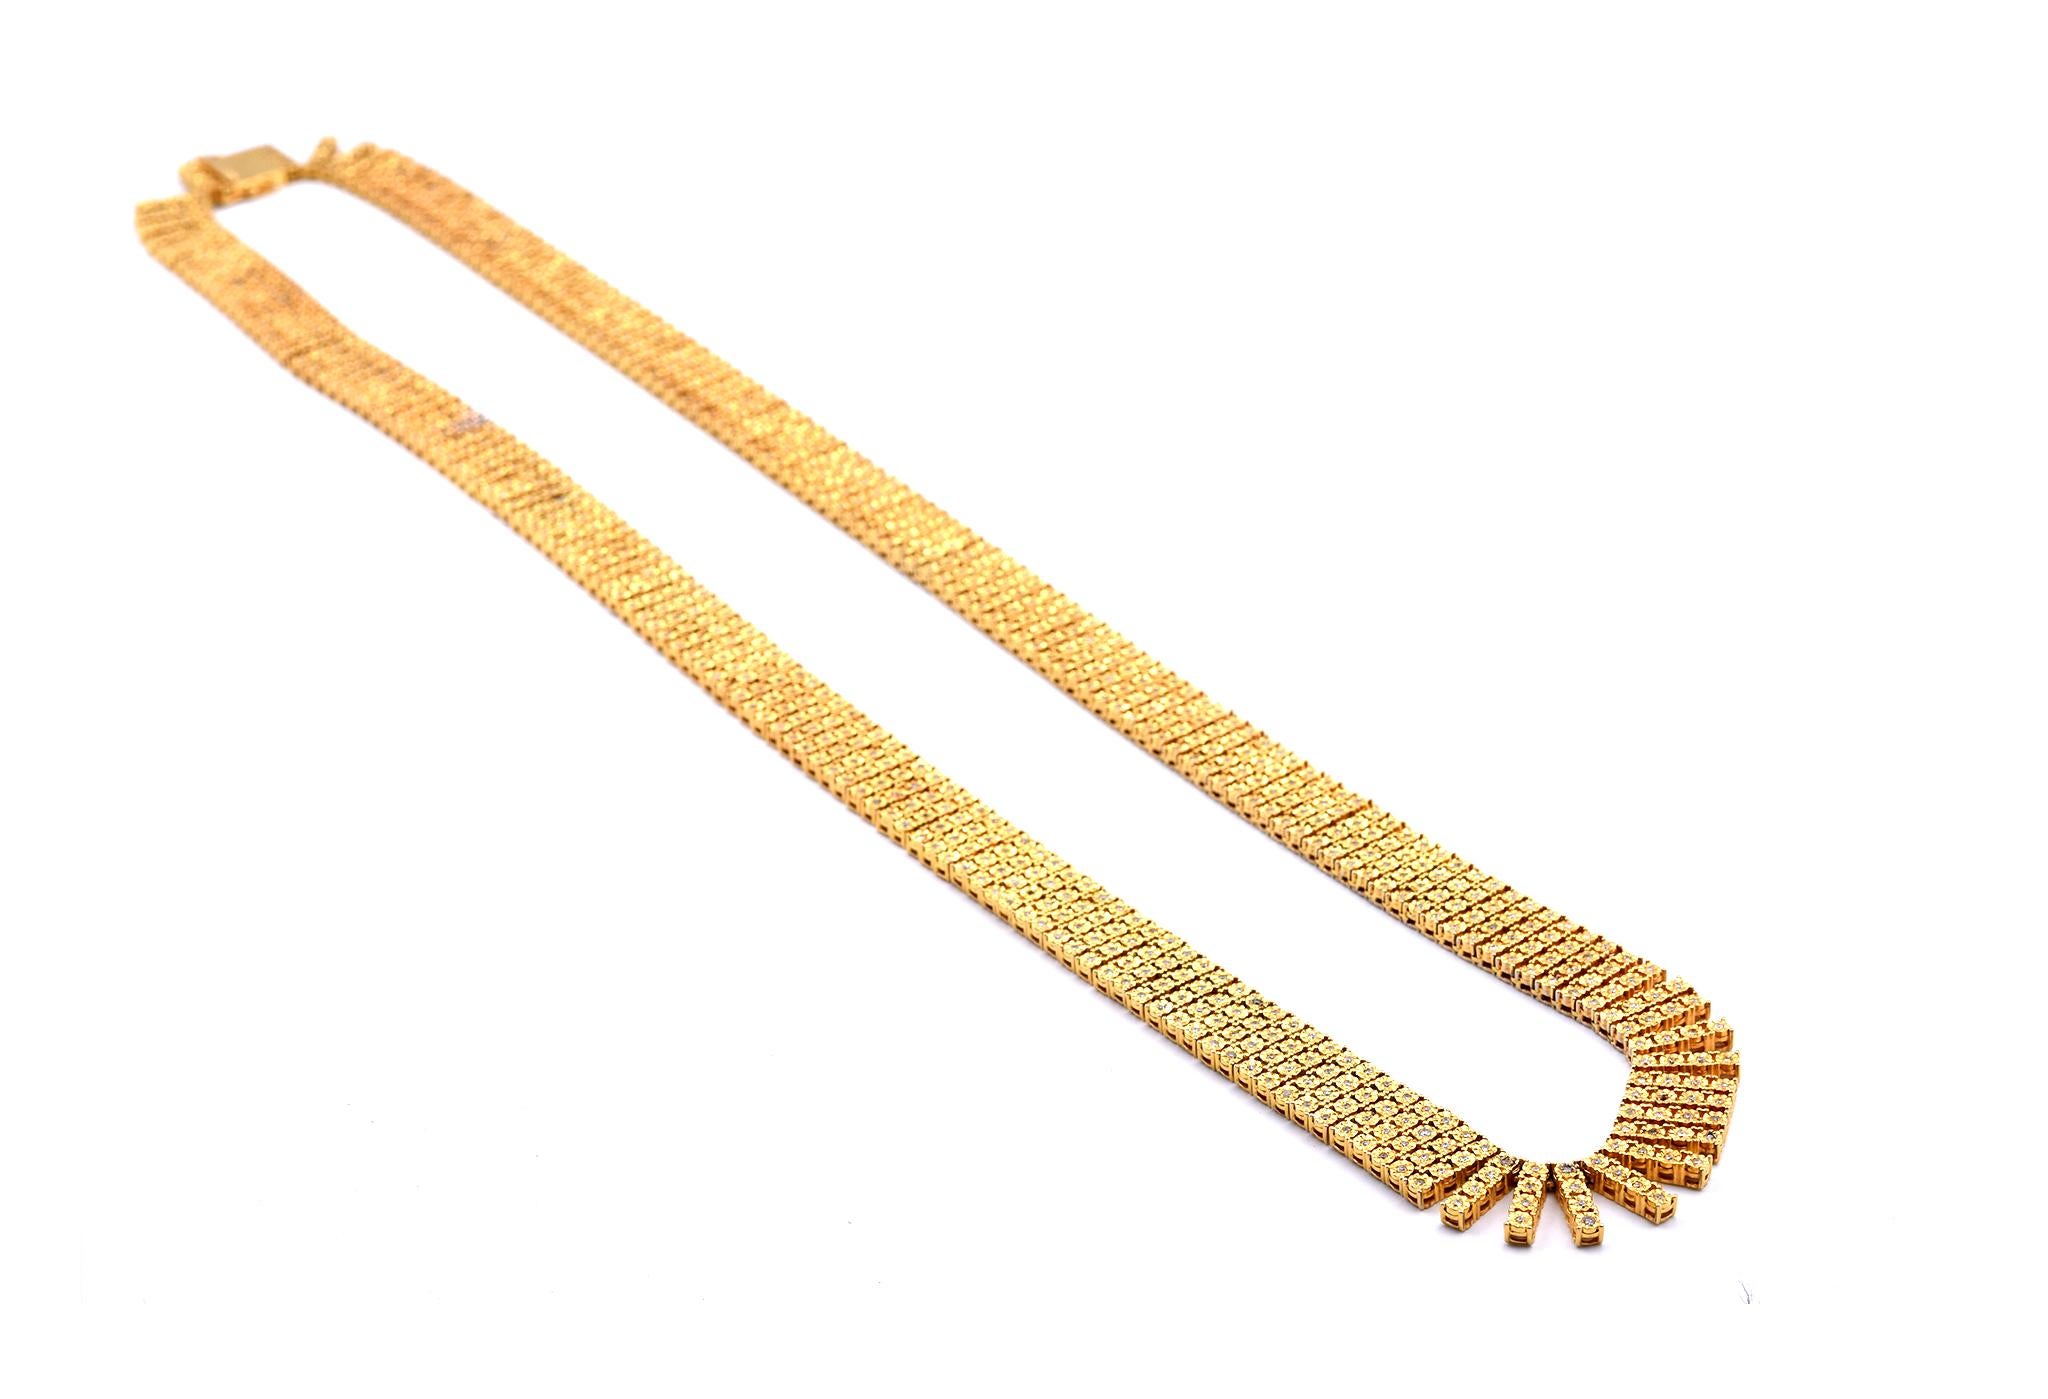 Designer: custom designed
Material: 14k yellow gold
Diamonds: 850 round brilliant cut= 1.80cttw
Color: I
Clarity: I1
Dimensions: necklace is 28 ½-inches long and it is 12.80mm wide
Weight: 48.95 grams
